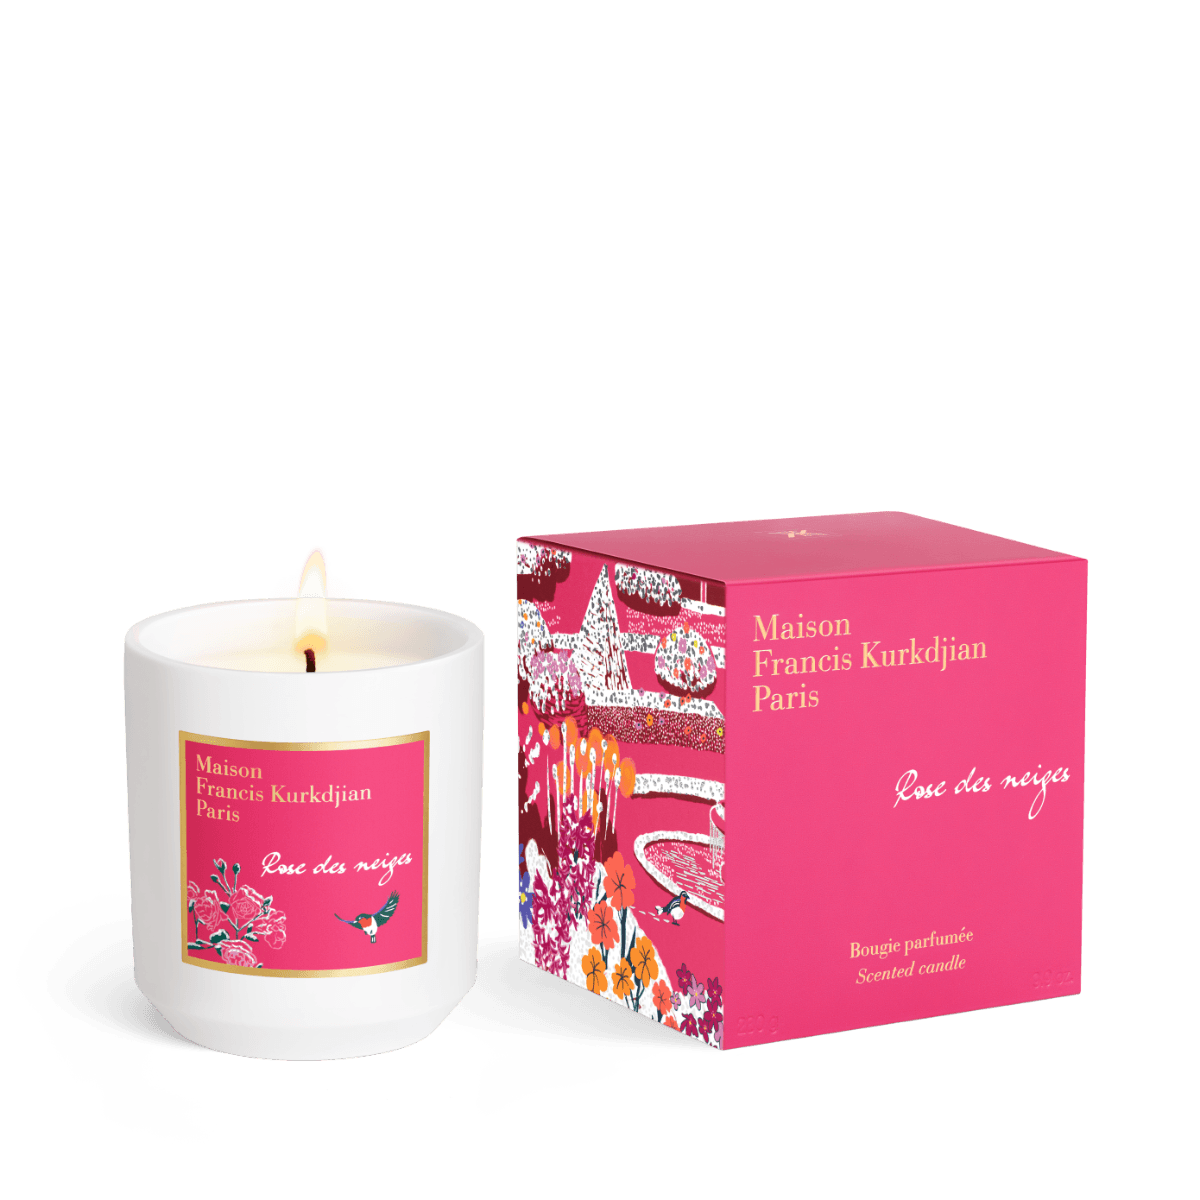 Image of Rose des Neiges scented candle by the perfume brand Maison Francis Kurkdjian